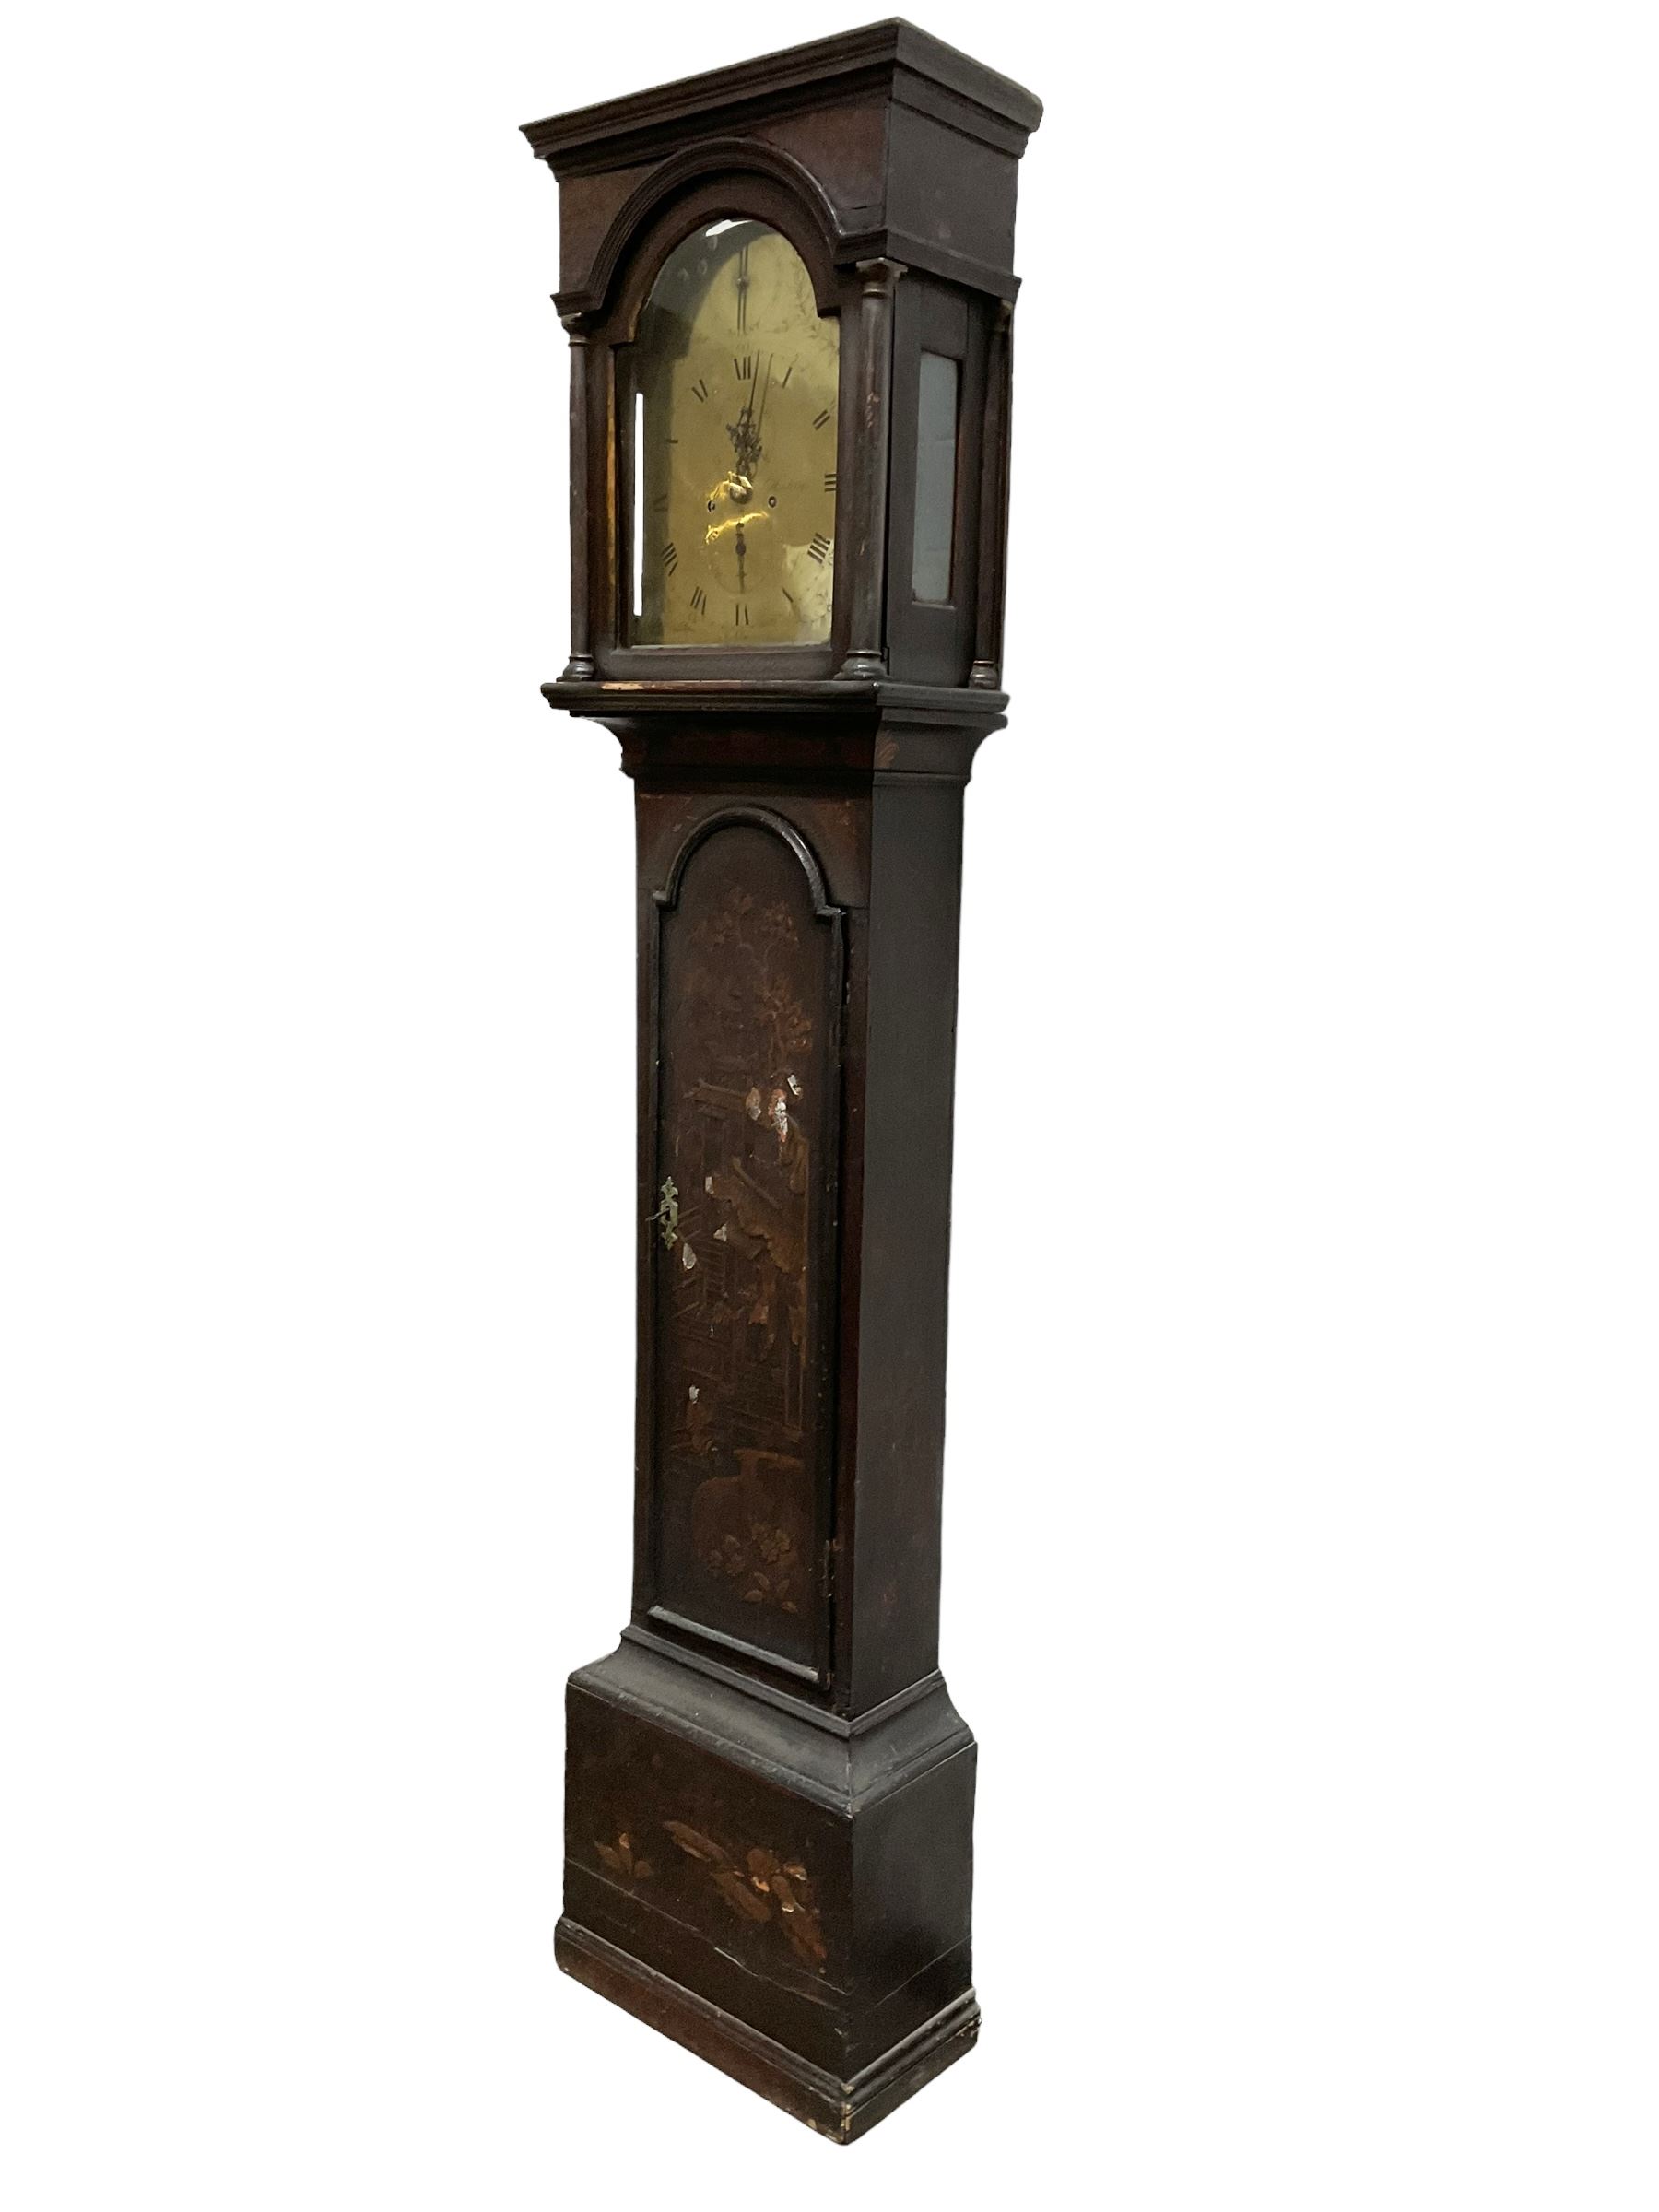 Fowle of Hastings - mid-18th century 8-day black-lacquer longcase clock - Image 2 of 8